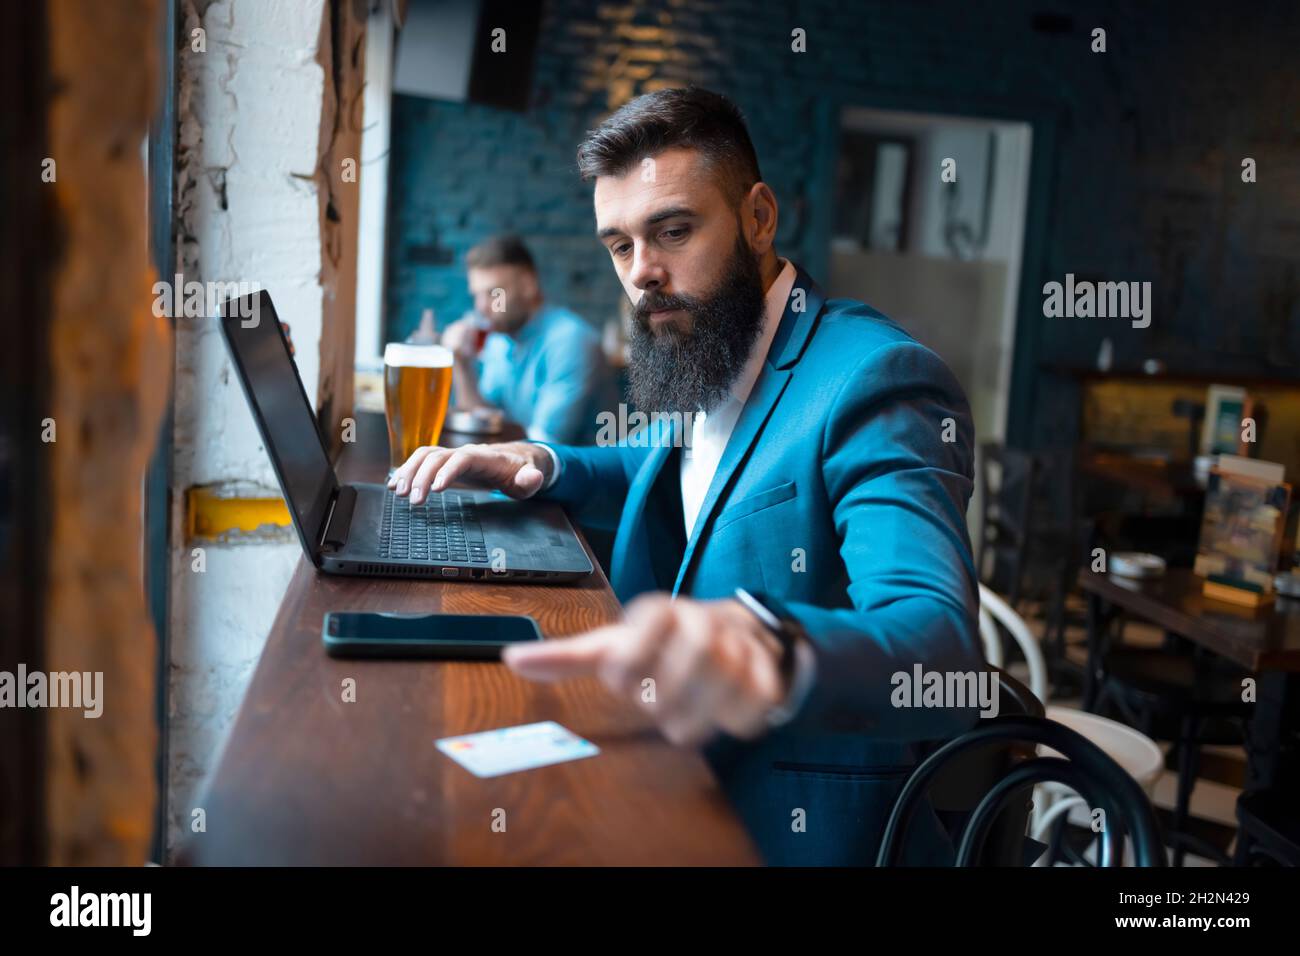 Young businessman using a laptop and a credit card in a cafe Stock Photo